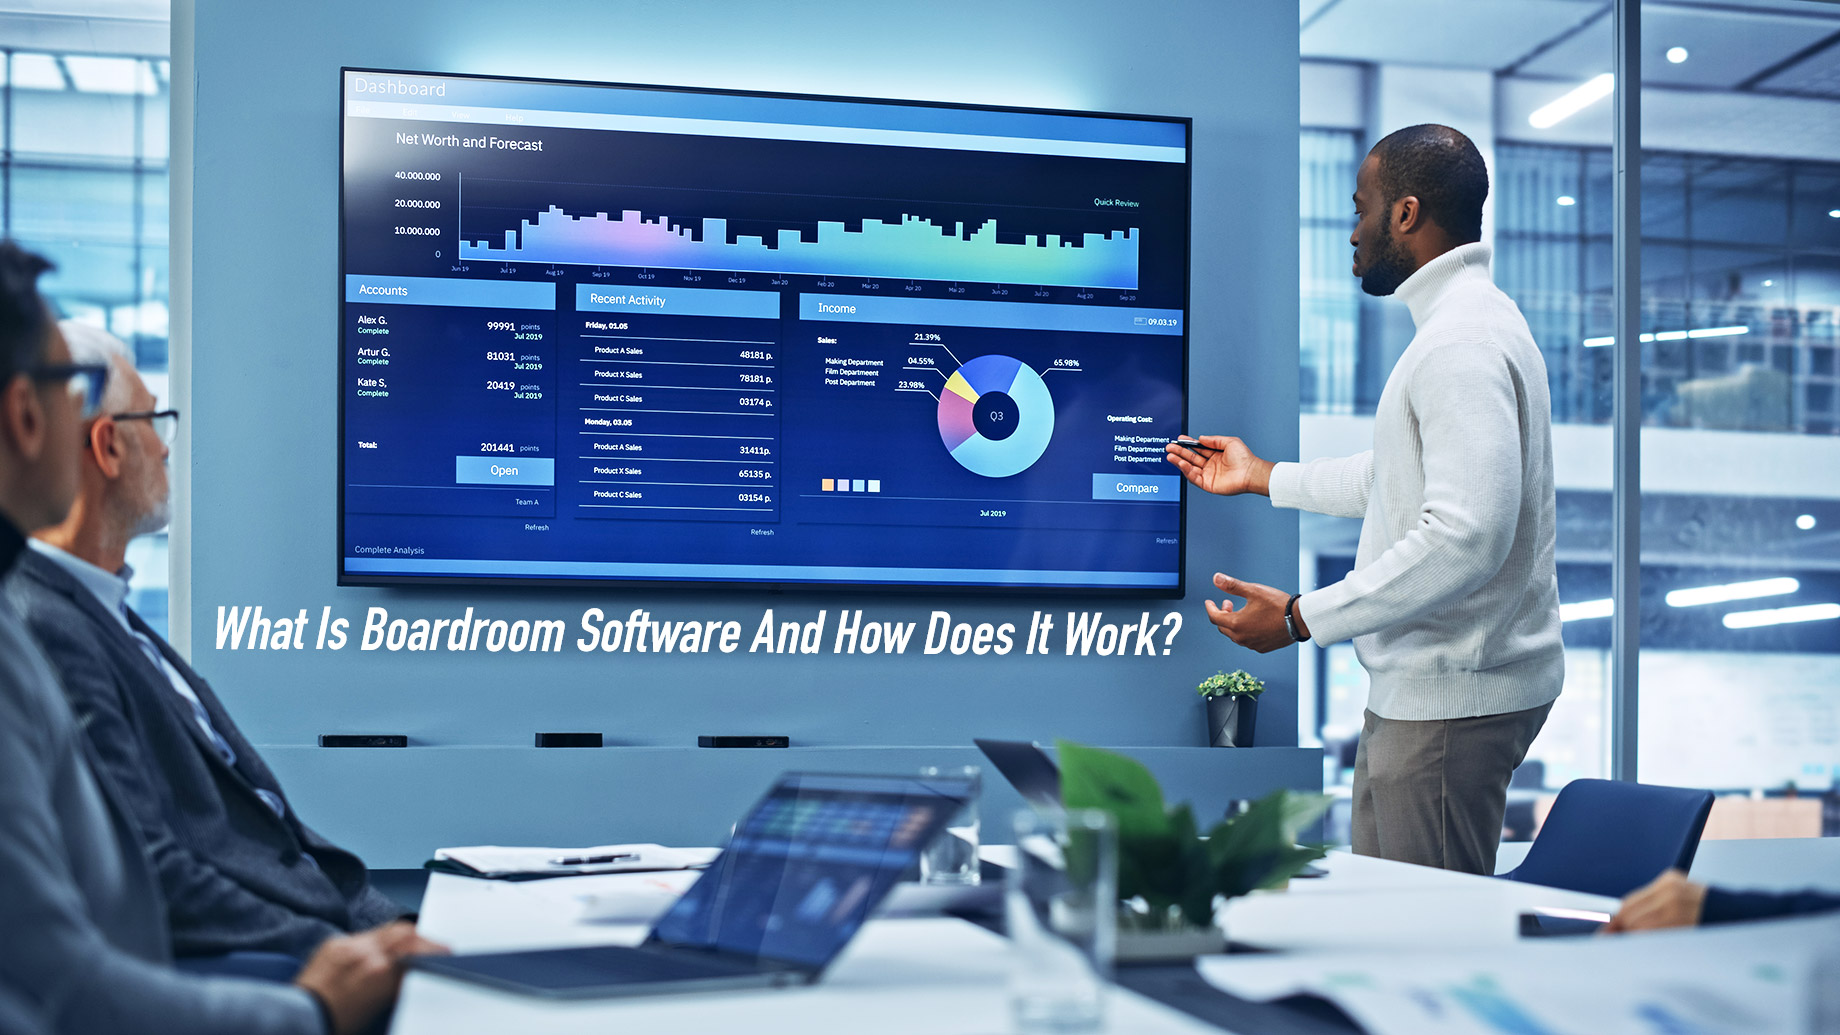 What Is Boardroom Software And How Does It Work?